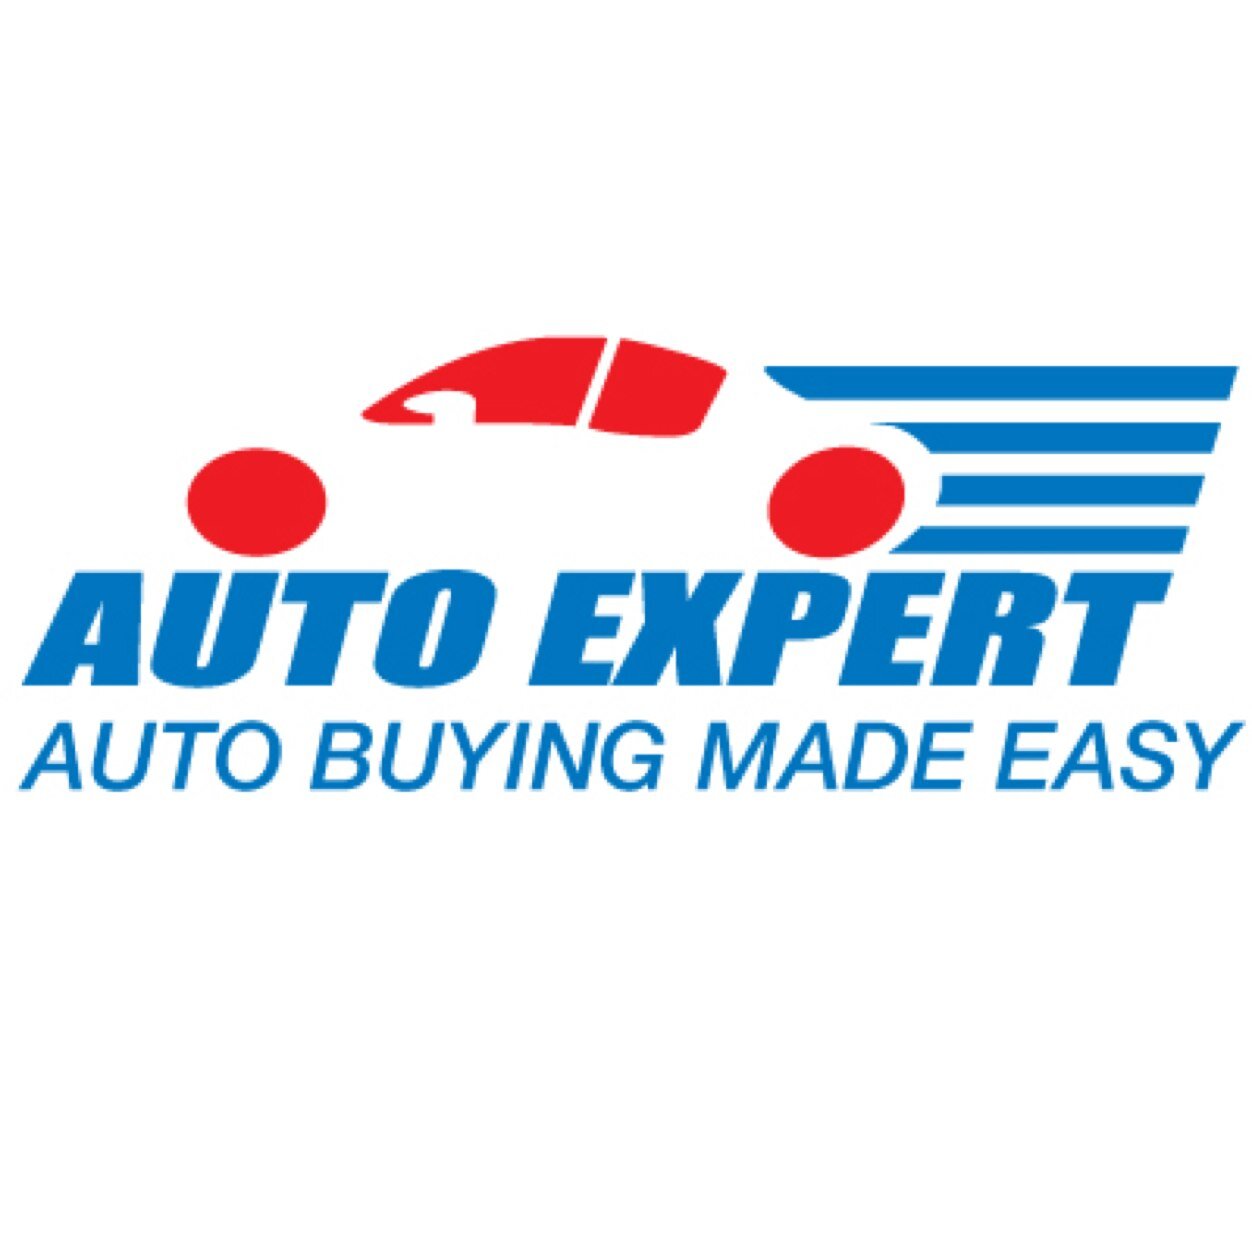 Auto Buying Made Easy